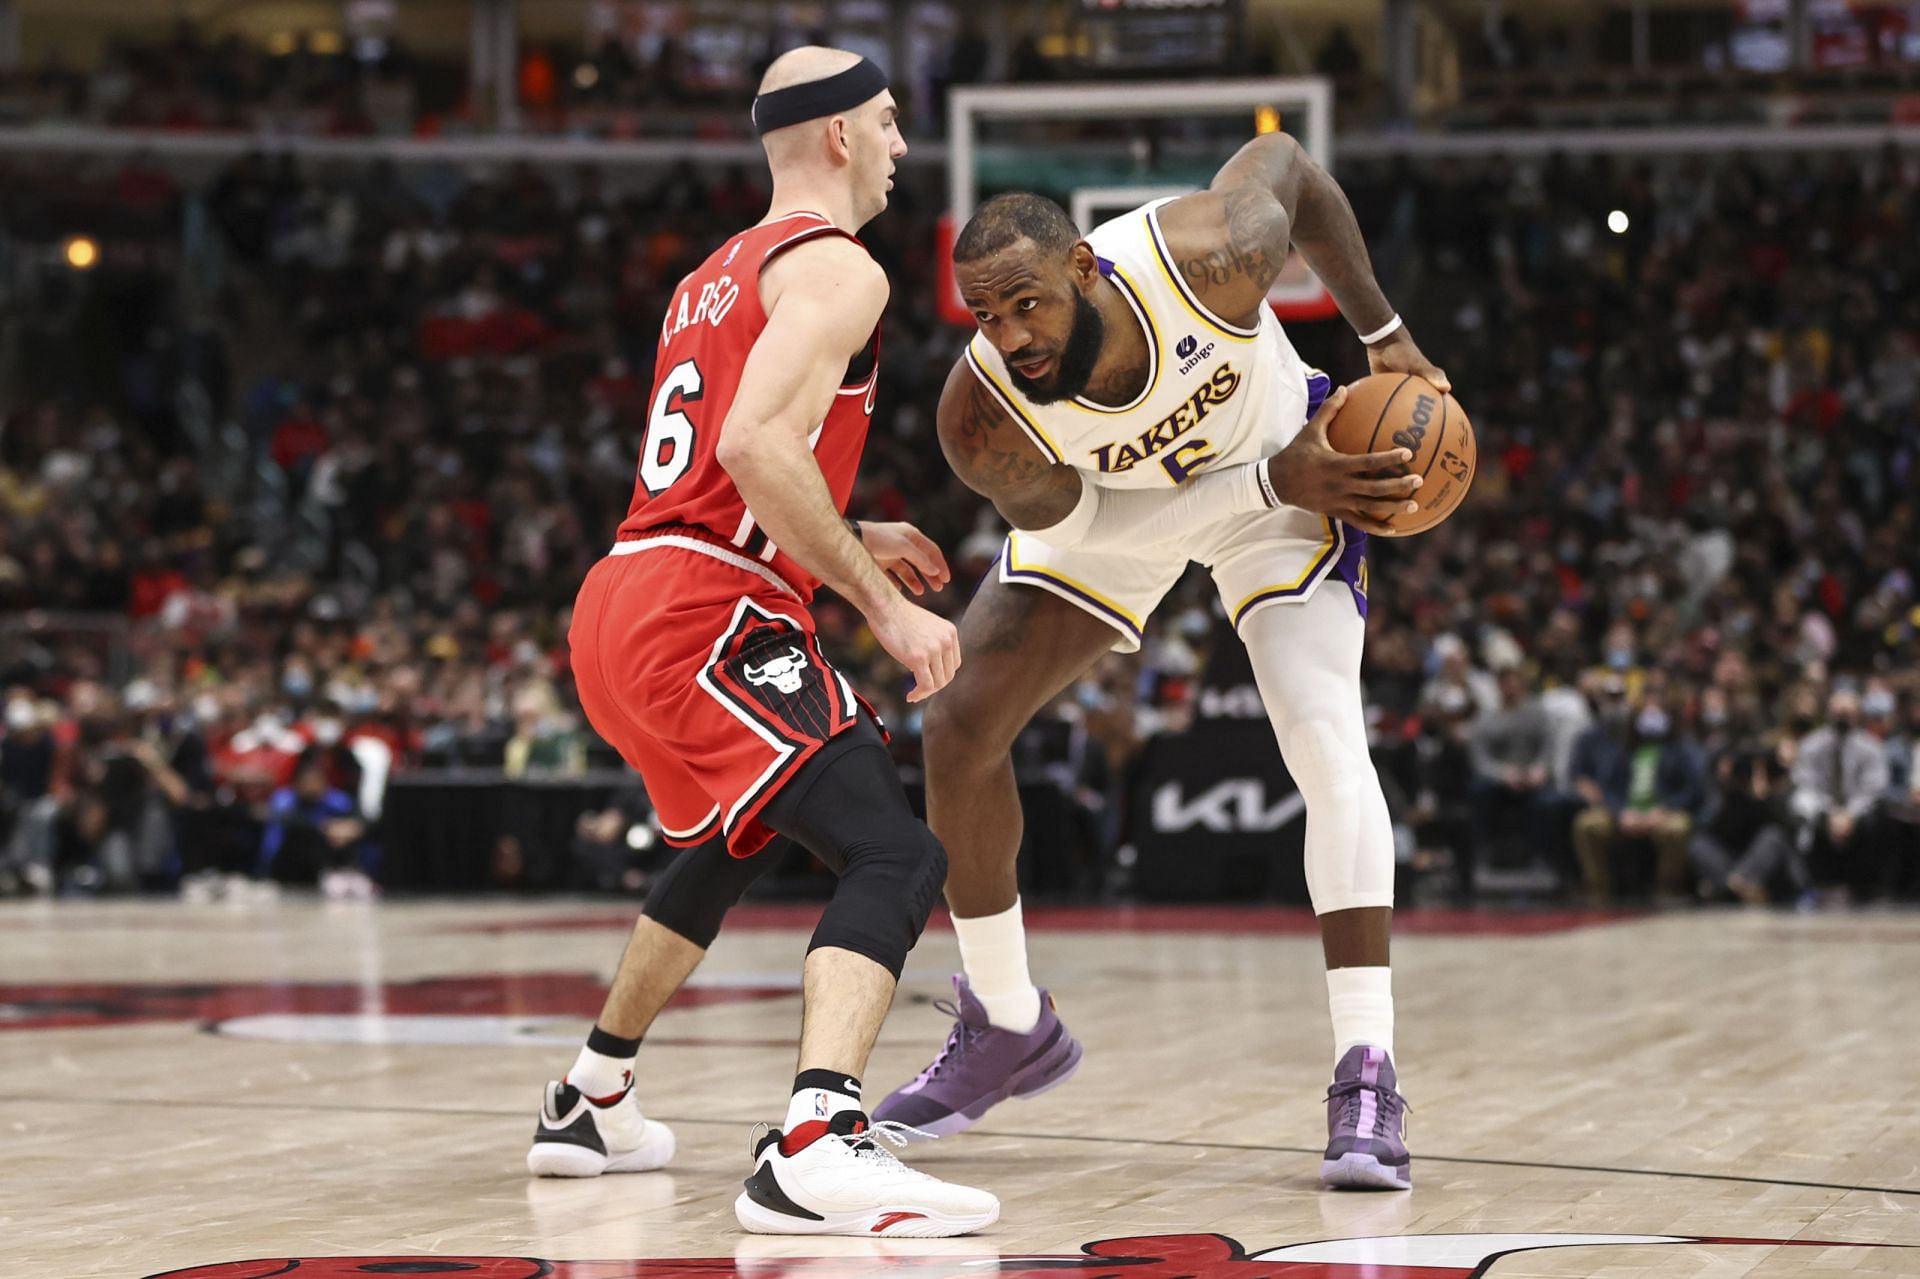 Is LeBron James playing tonight against Bulls? Latest injury update on Lakers’ star ahead of matchup (March 26, 2023) - SwiftTelecast